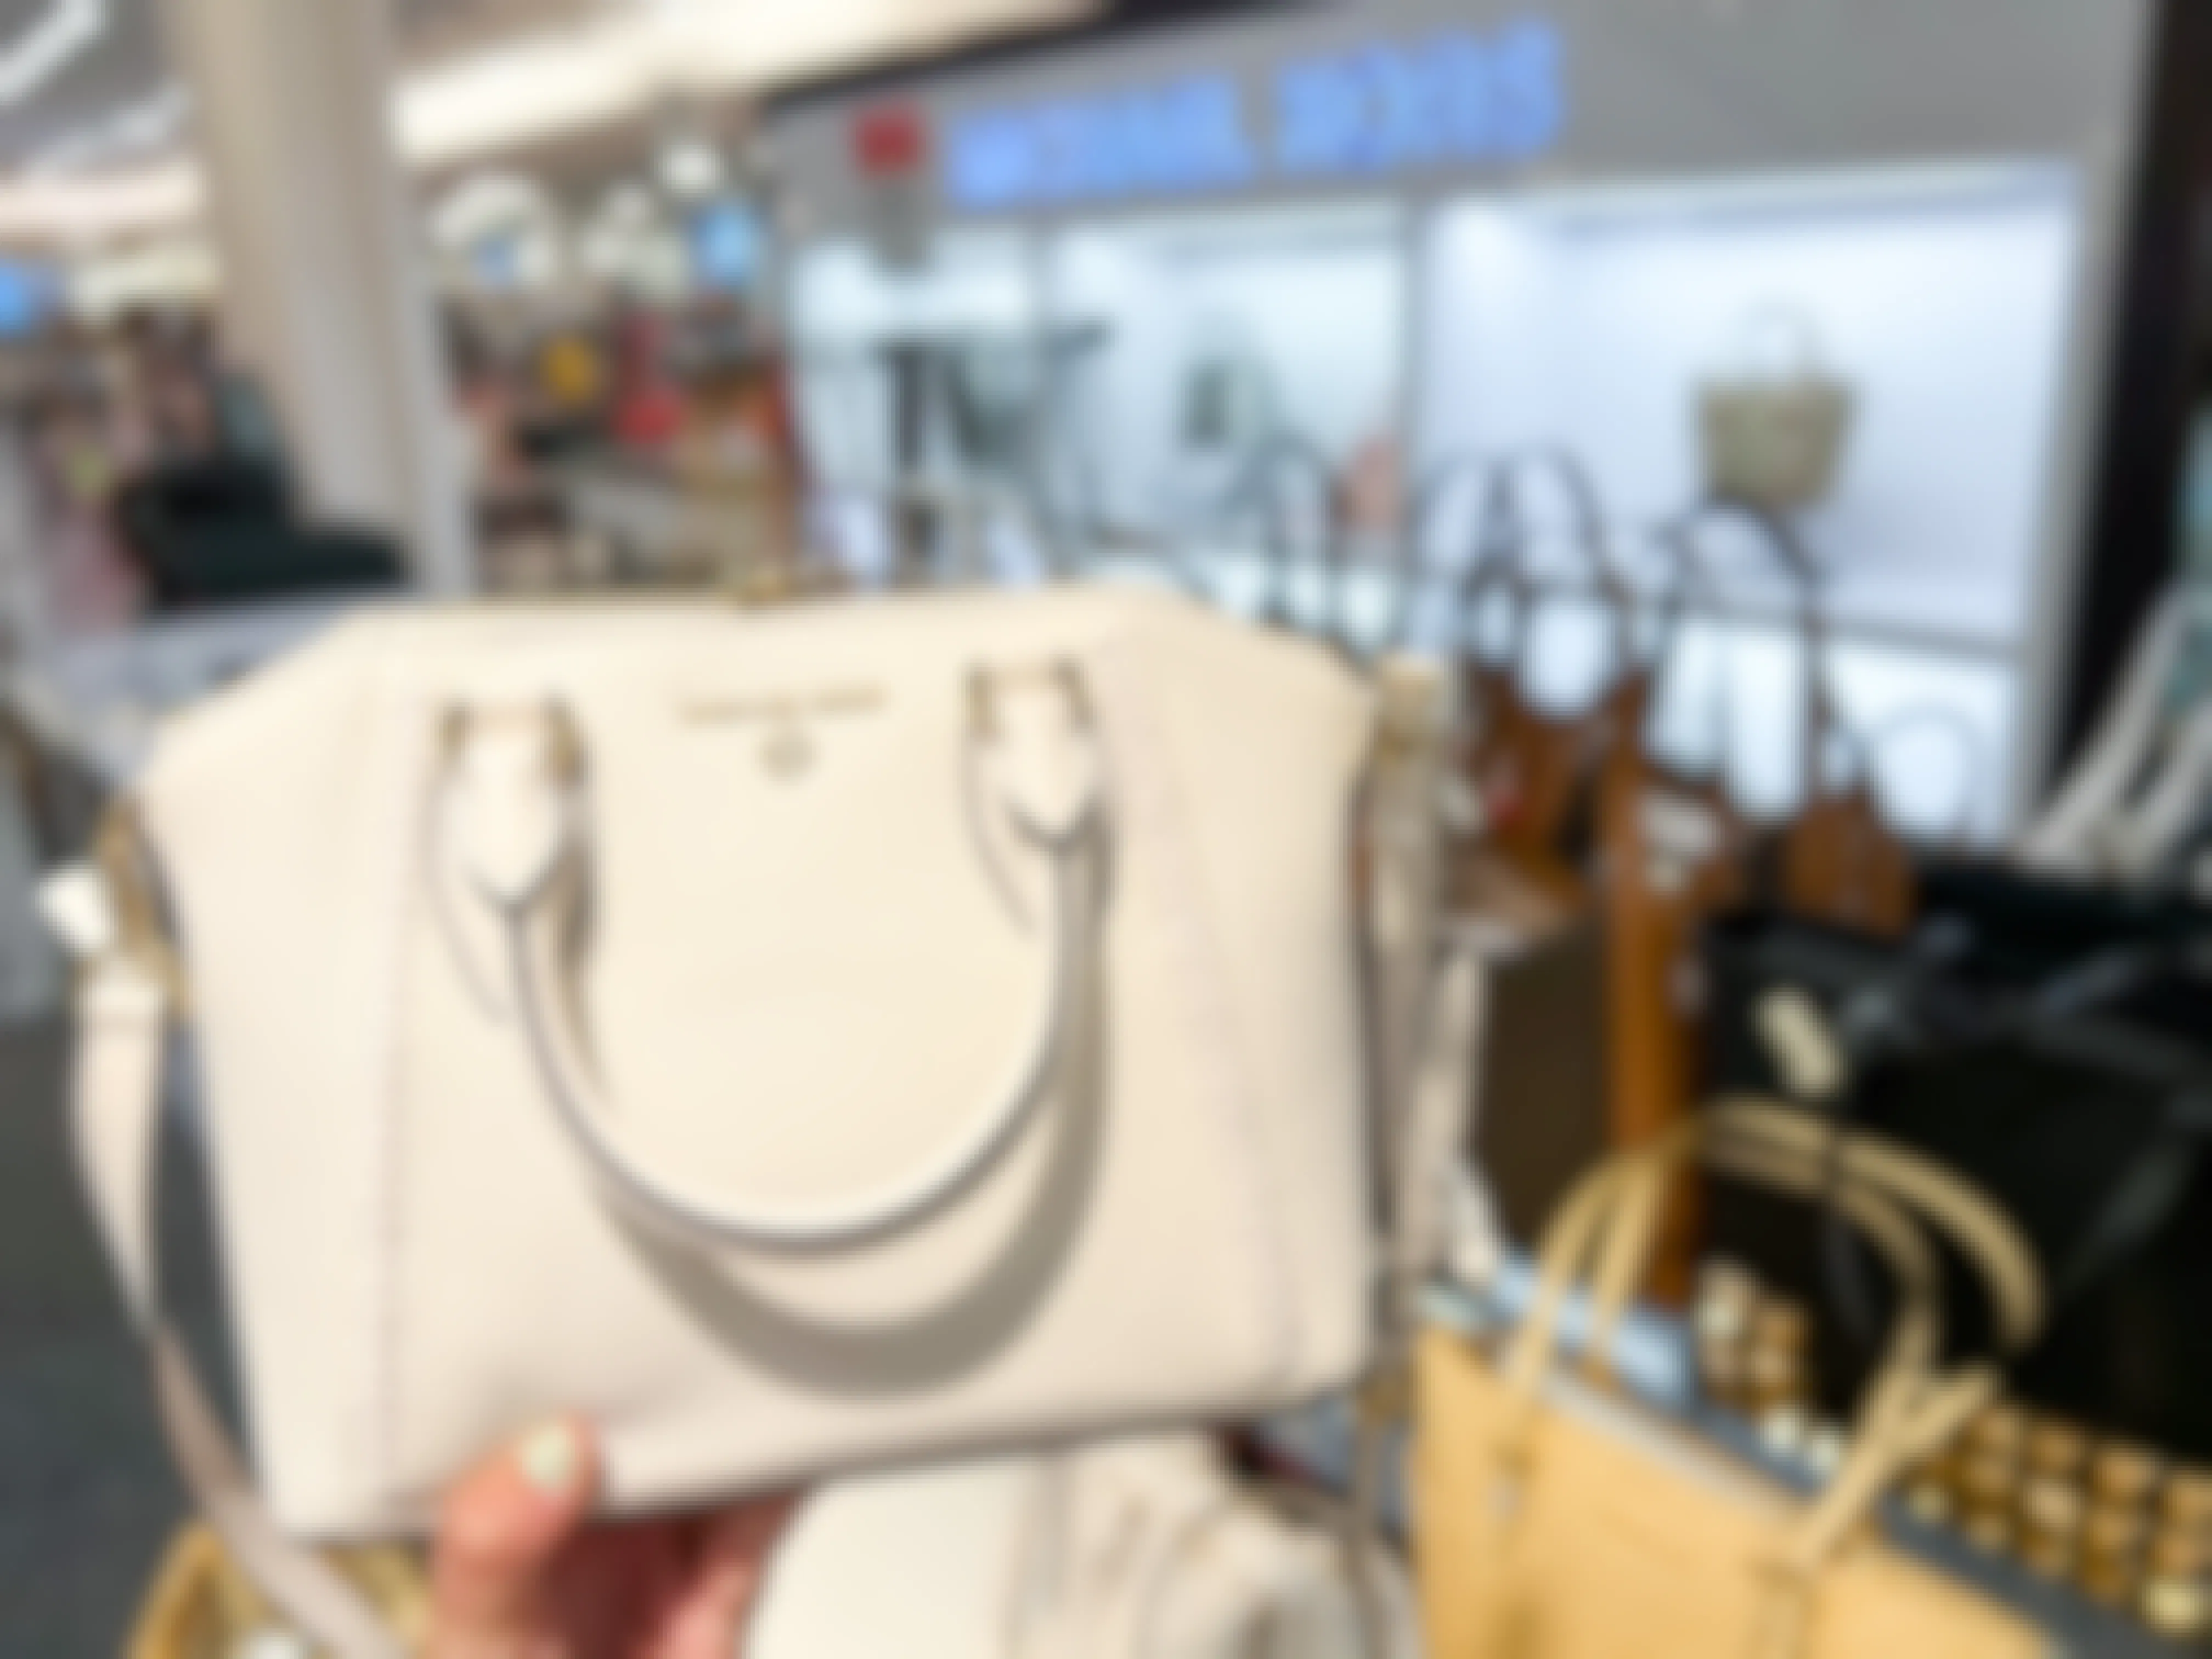 Michael Kors Bestselling Leather Crossbody Bag, Only $70 + More Deals